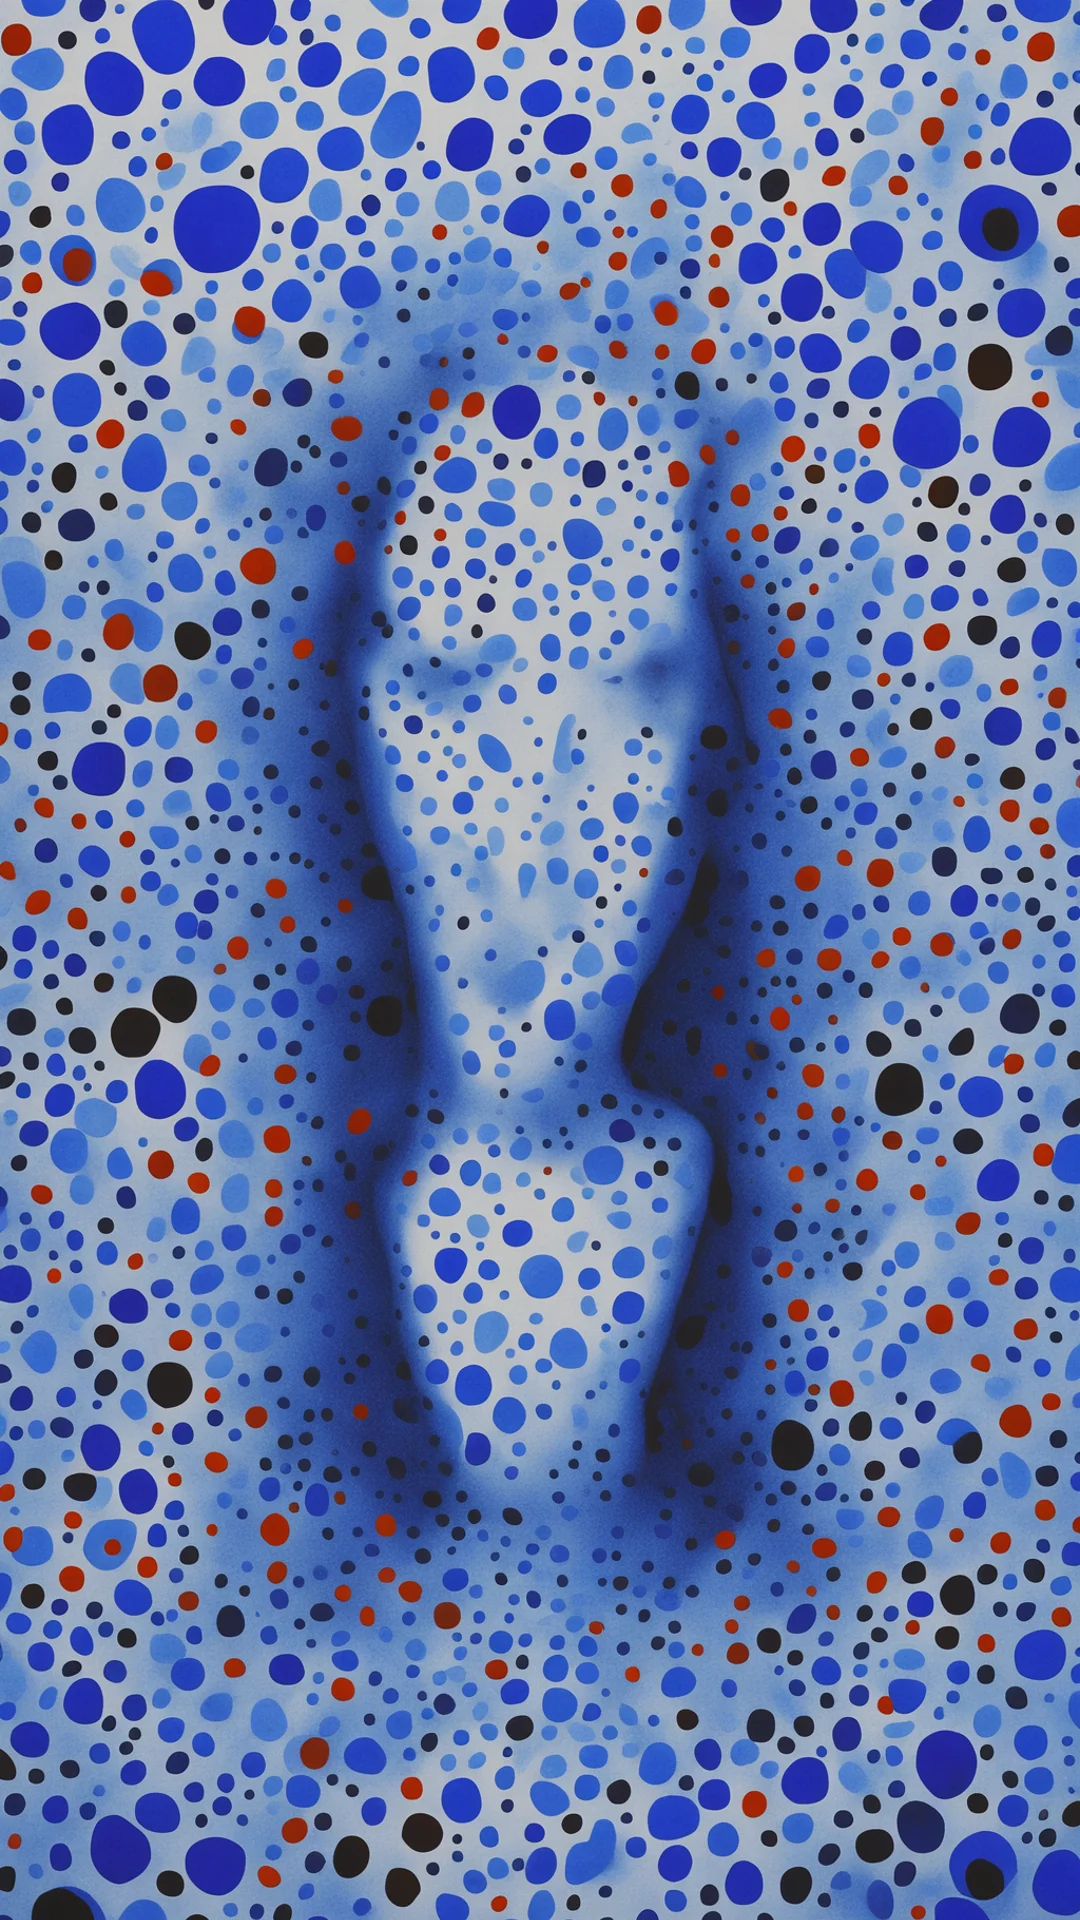 angst and distress in blue tones yayoi kusama style good looking trending fantastic 1 tall